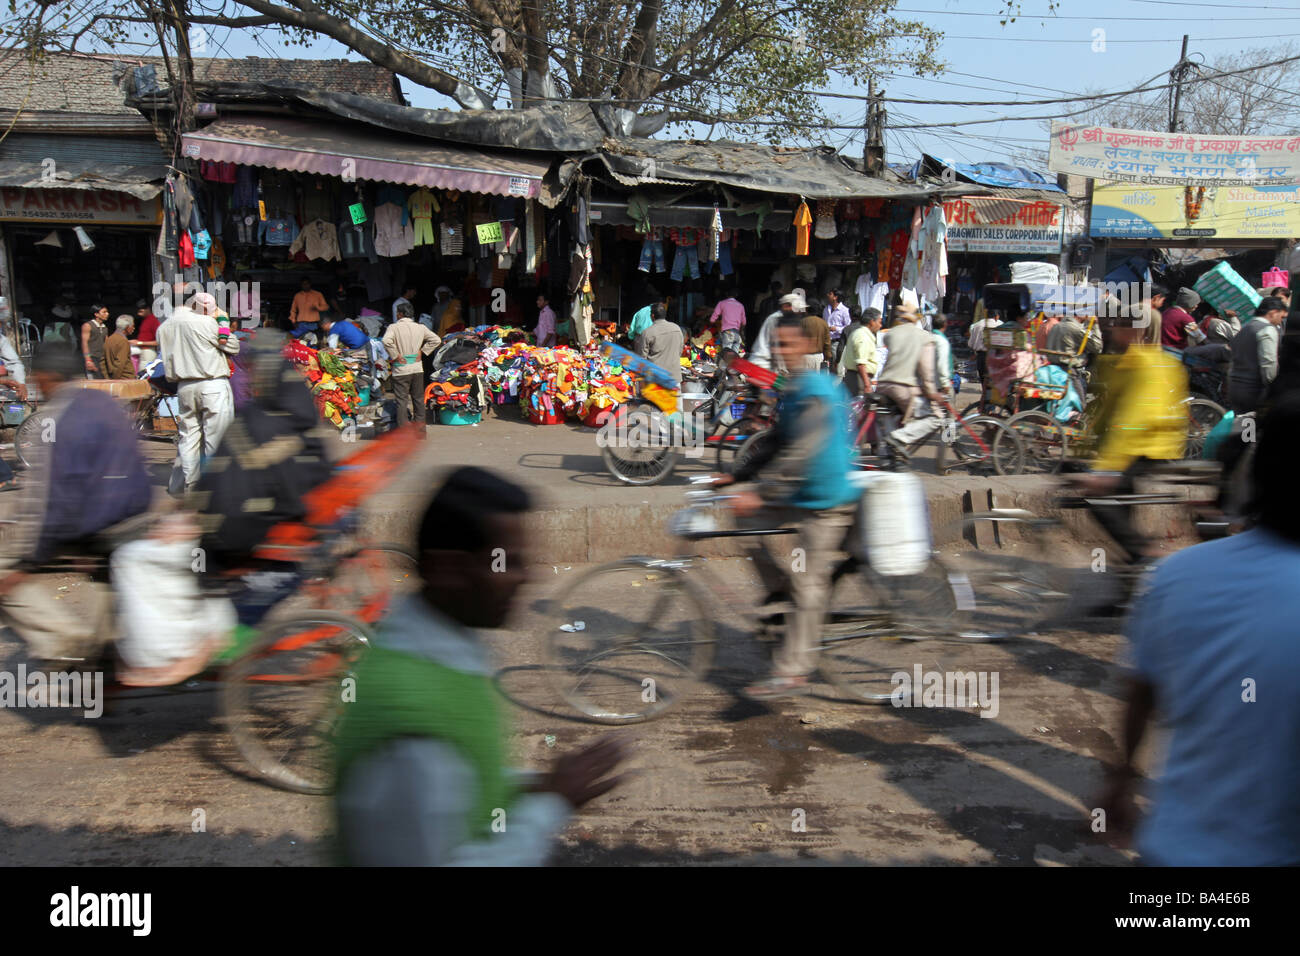 Indians go about their business along Old Delhi's famous street Chandi Chowk Stock Photo